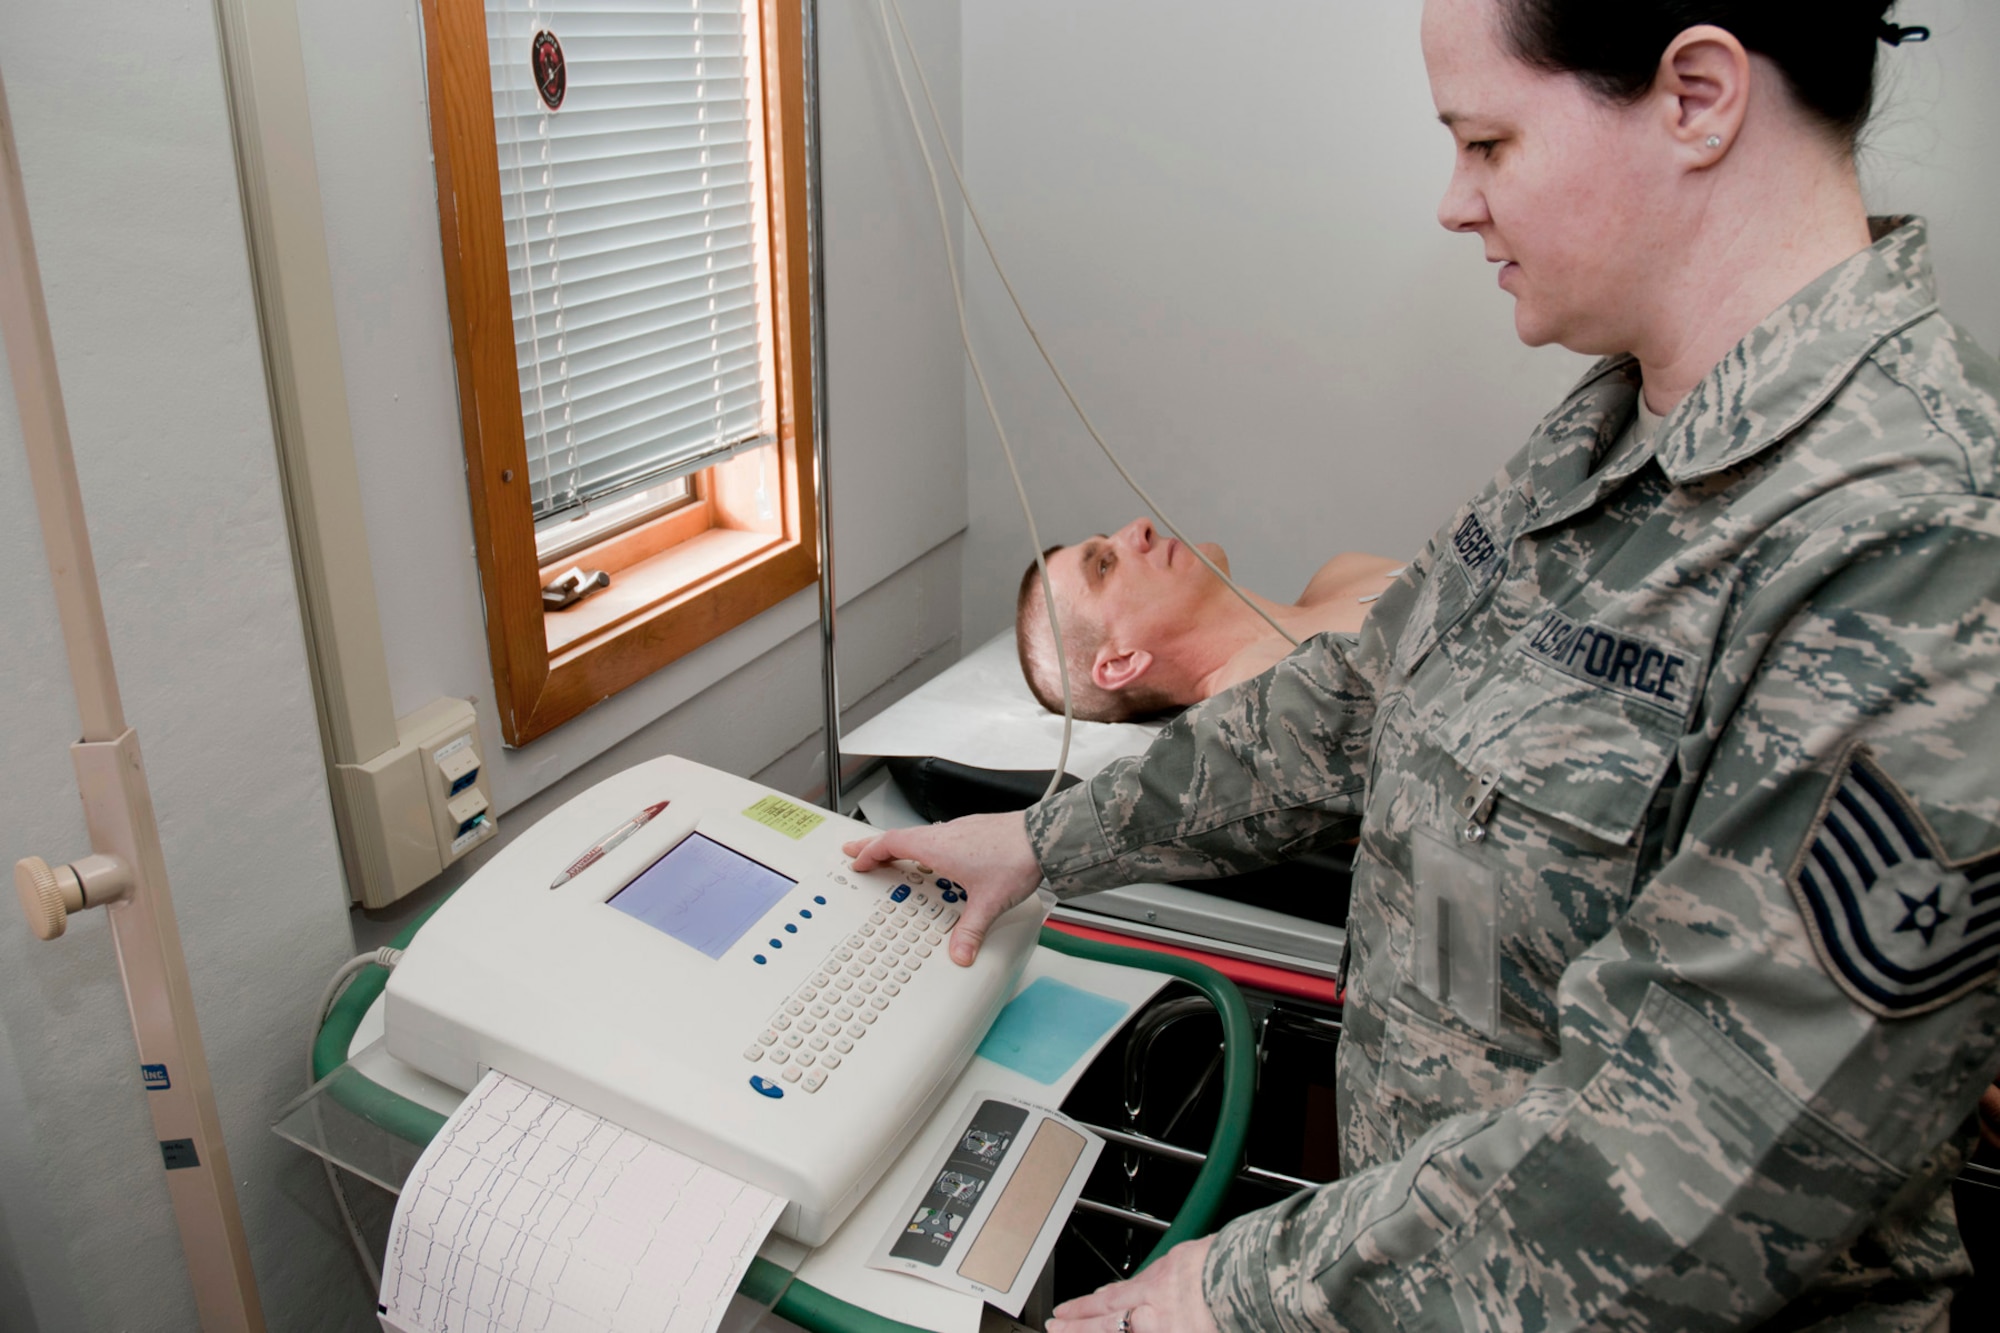 Tech. Sgt. Stephanie Ploeger (front right) hooks Master Sgt. Mike Johnson (back middle) up to an electrocardiogram (EKG) machine for simulated testing on his heart in the exam room of the 132nd Fighter Wing (132FW) Medical Facility, Des Moines, Iowa on February 7, 2014.  (U.S. Air National Guard photo by Staff Sgt. Linda K. Burger/Released)